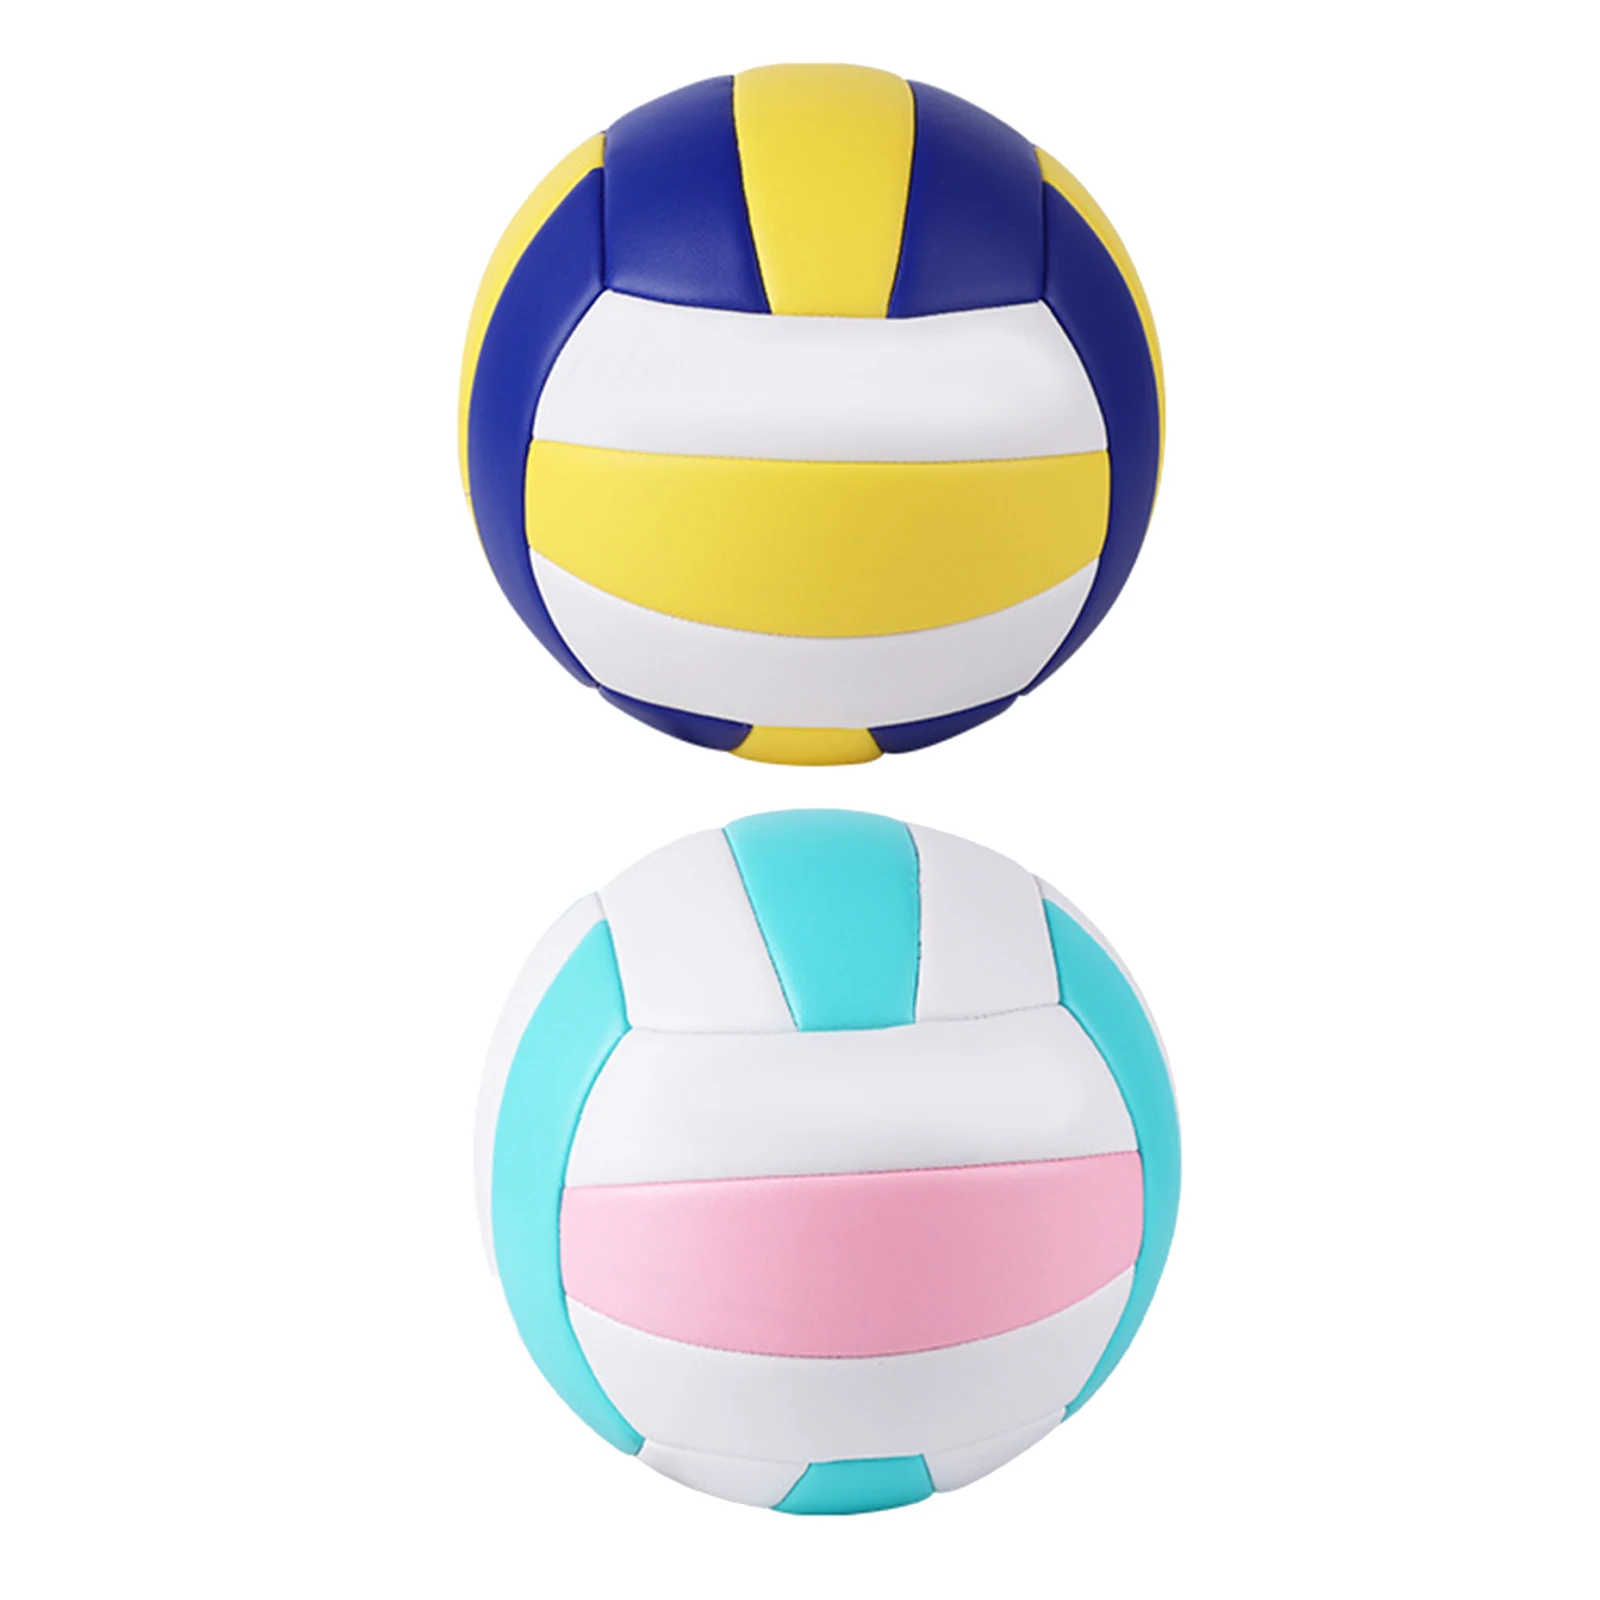 Details about   Official Size 5 Beach Volleyball Indoor Outdoor Ball Pool Gym Match Training 